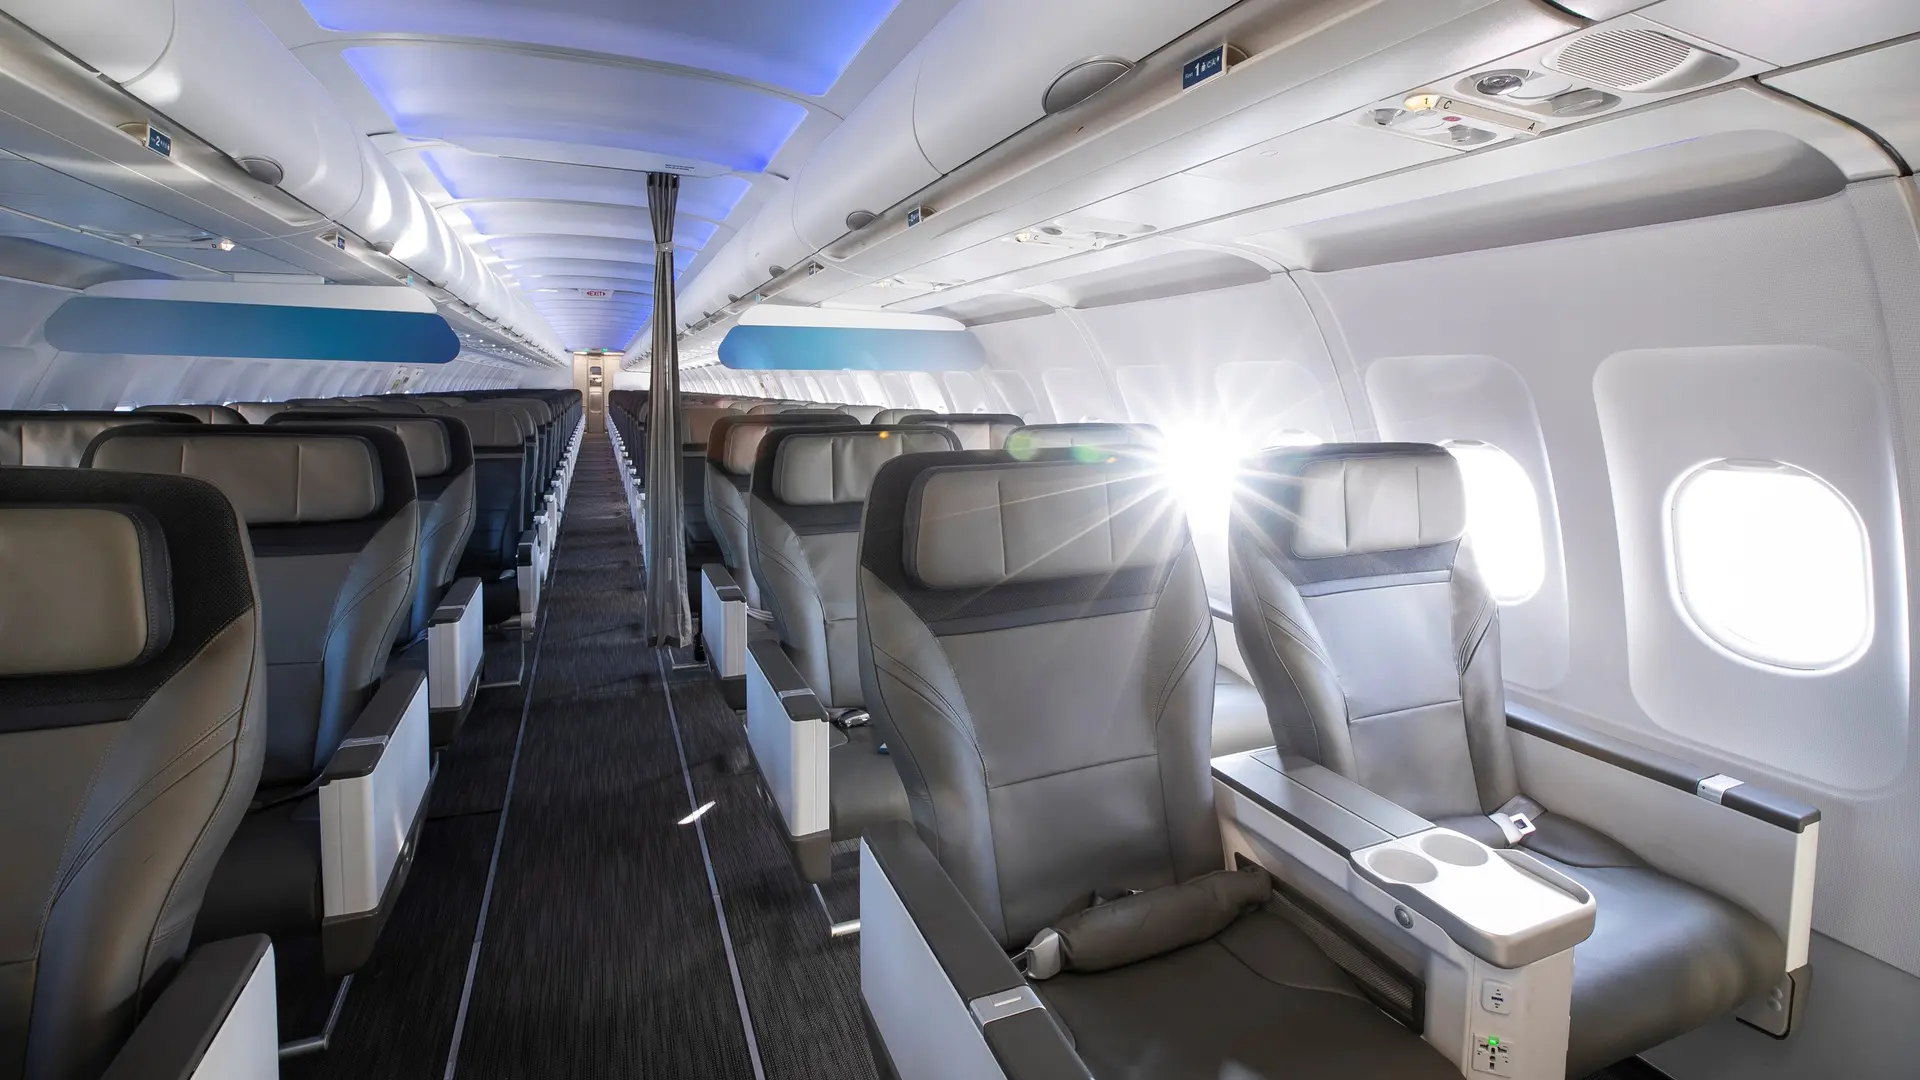 Airlines Articles - Domestic Premium Cabins in the USA - The BusinessClass.com Guide